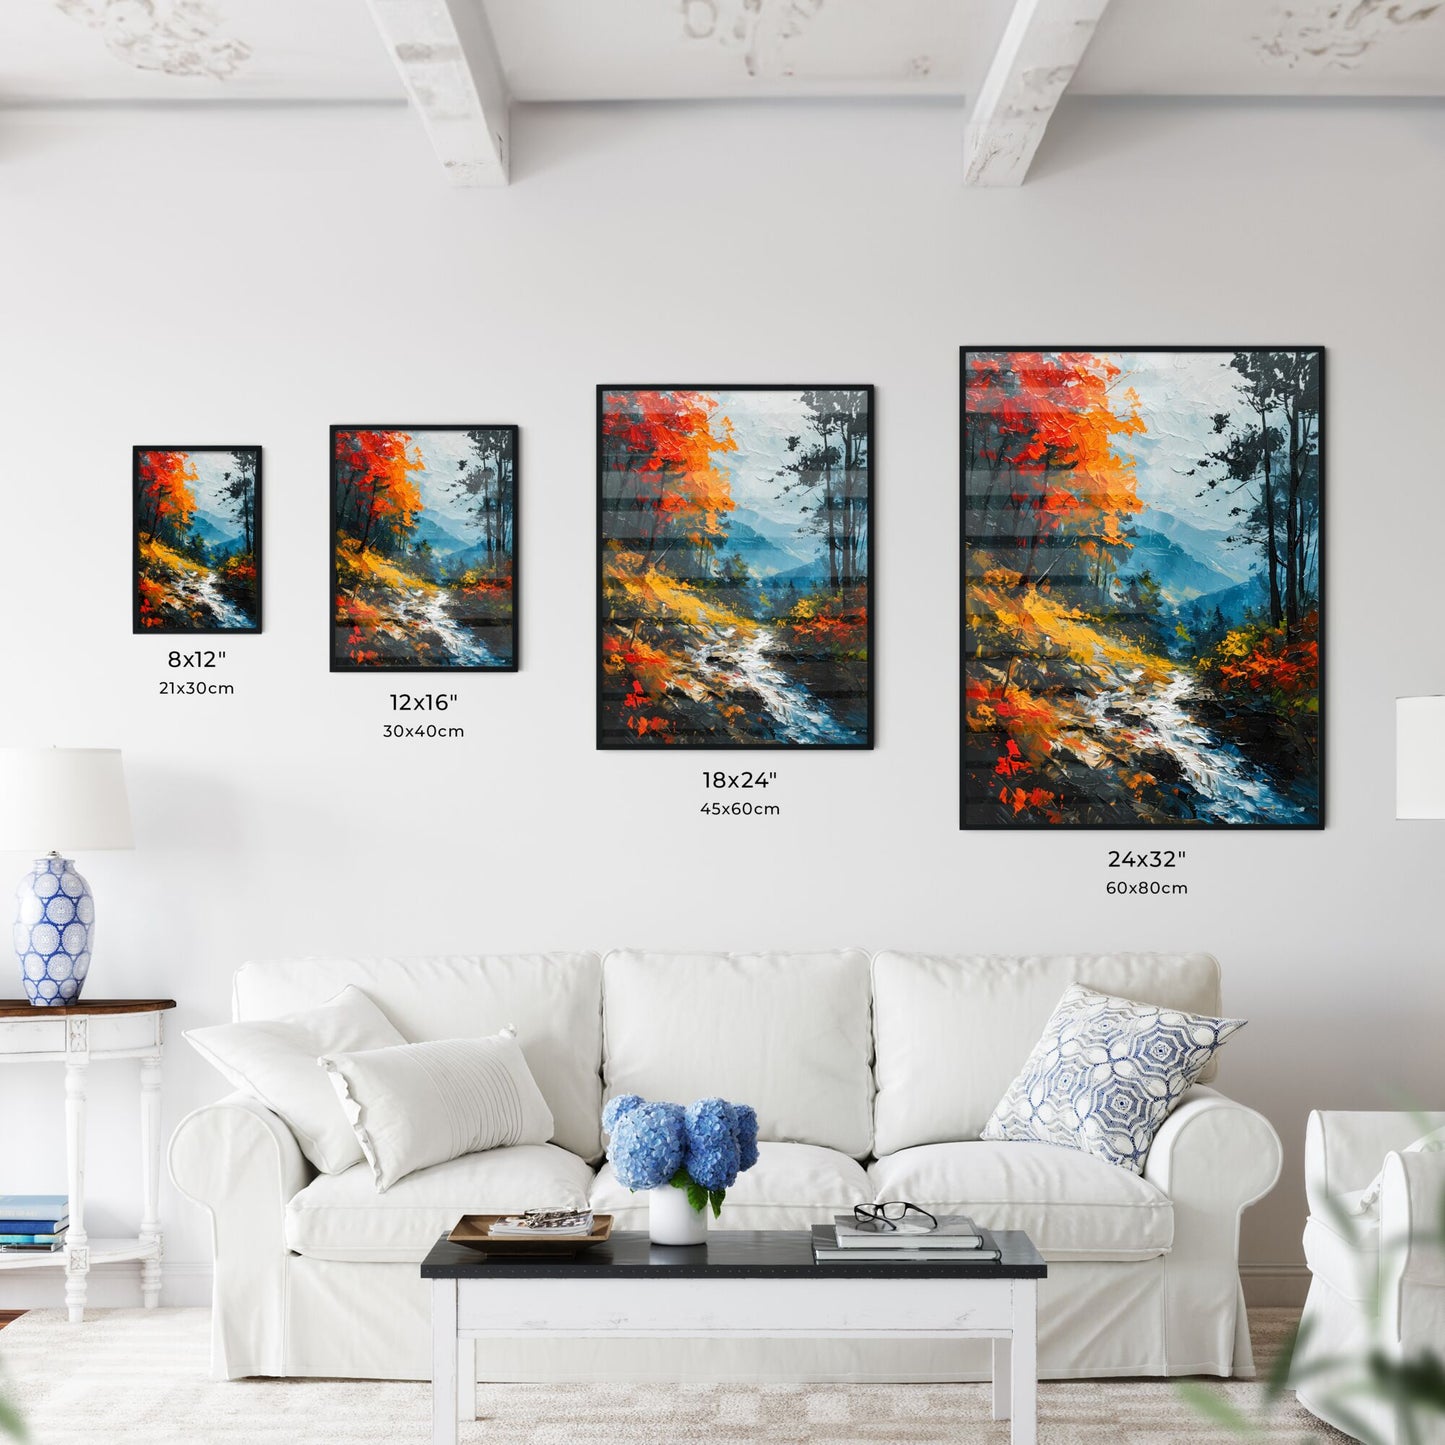 A Poster of Waterfalls landscape - A Painting Of A River Running Through A Forest Default Title